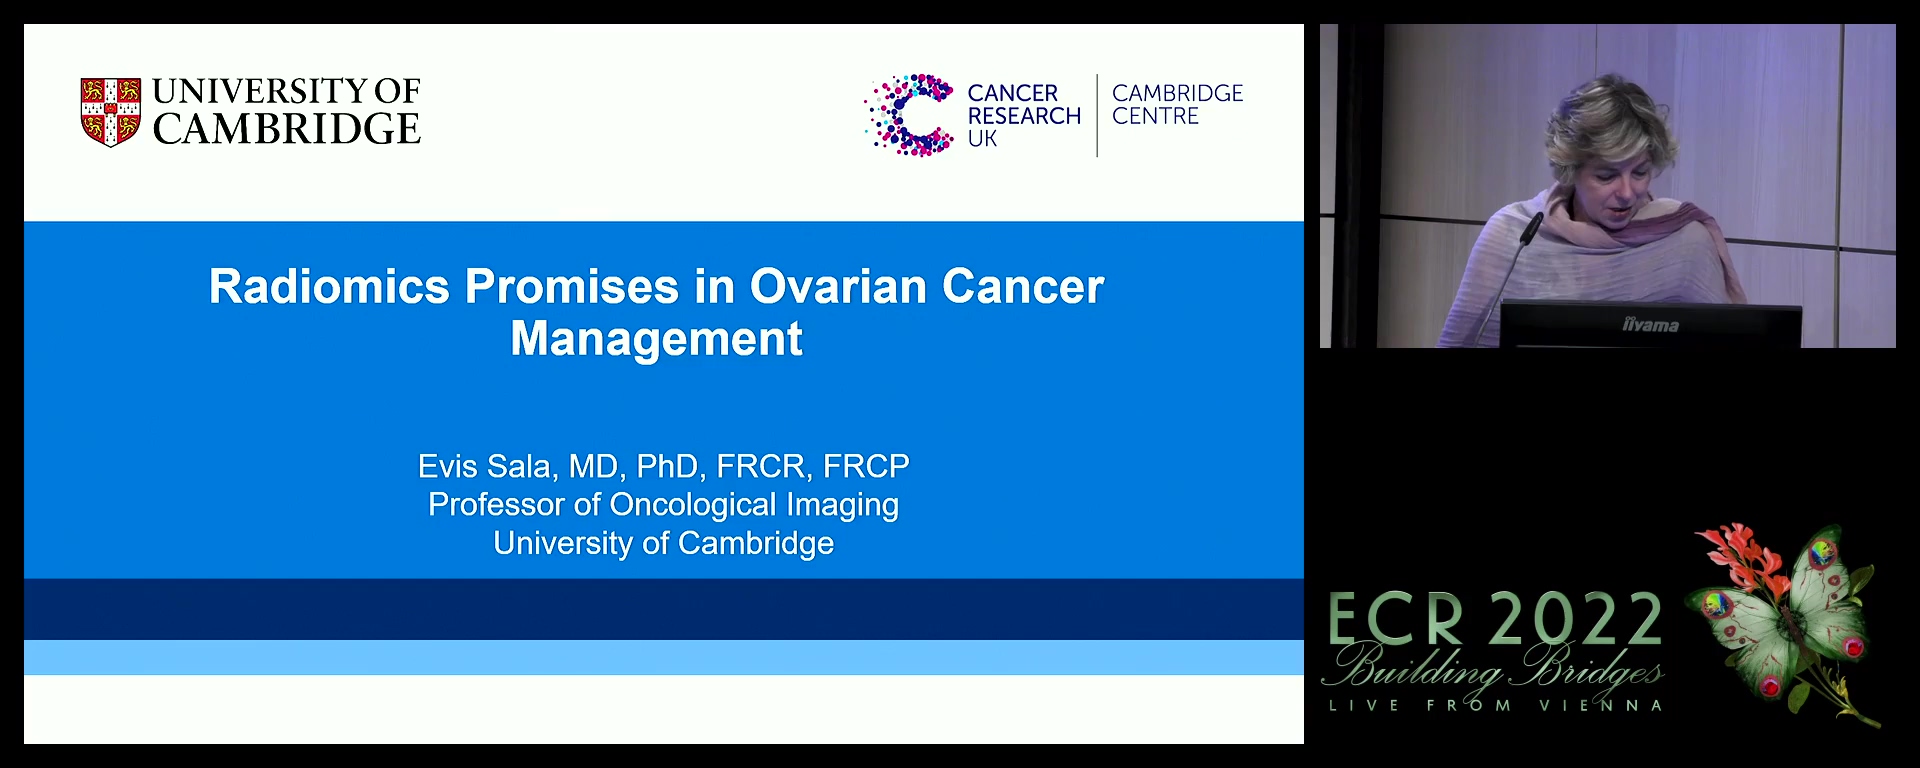 Radiomics promises in ovarian cancer management